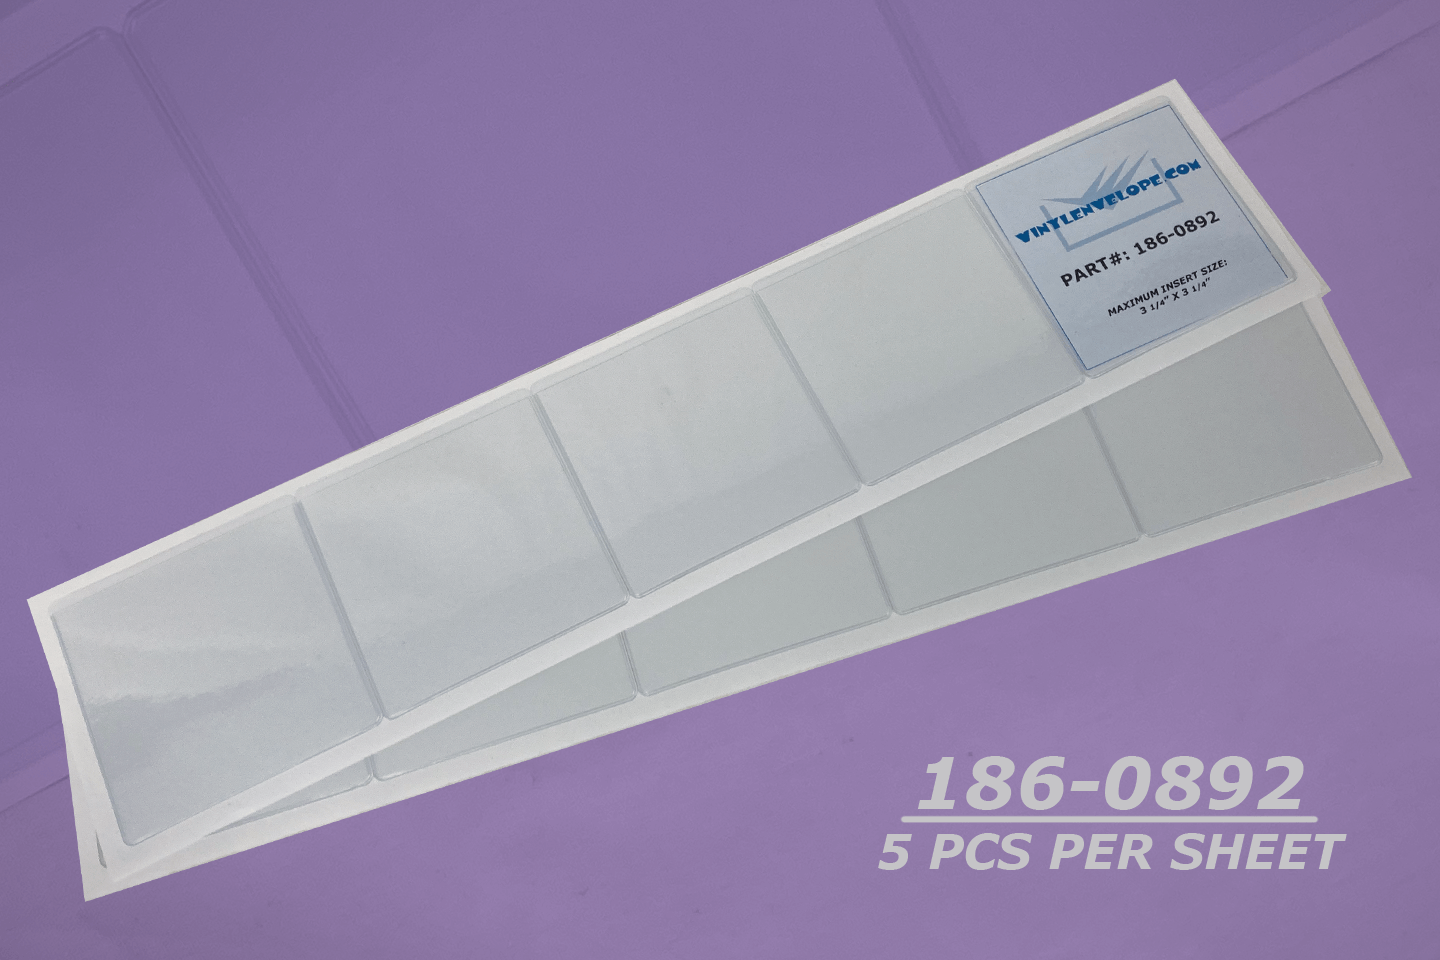 3 1/4" X 3 1/4" Adhesive Pouch